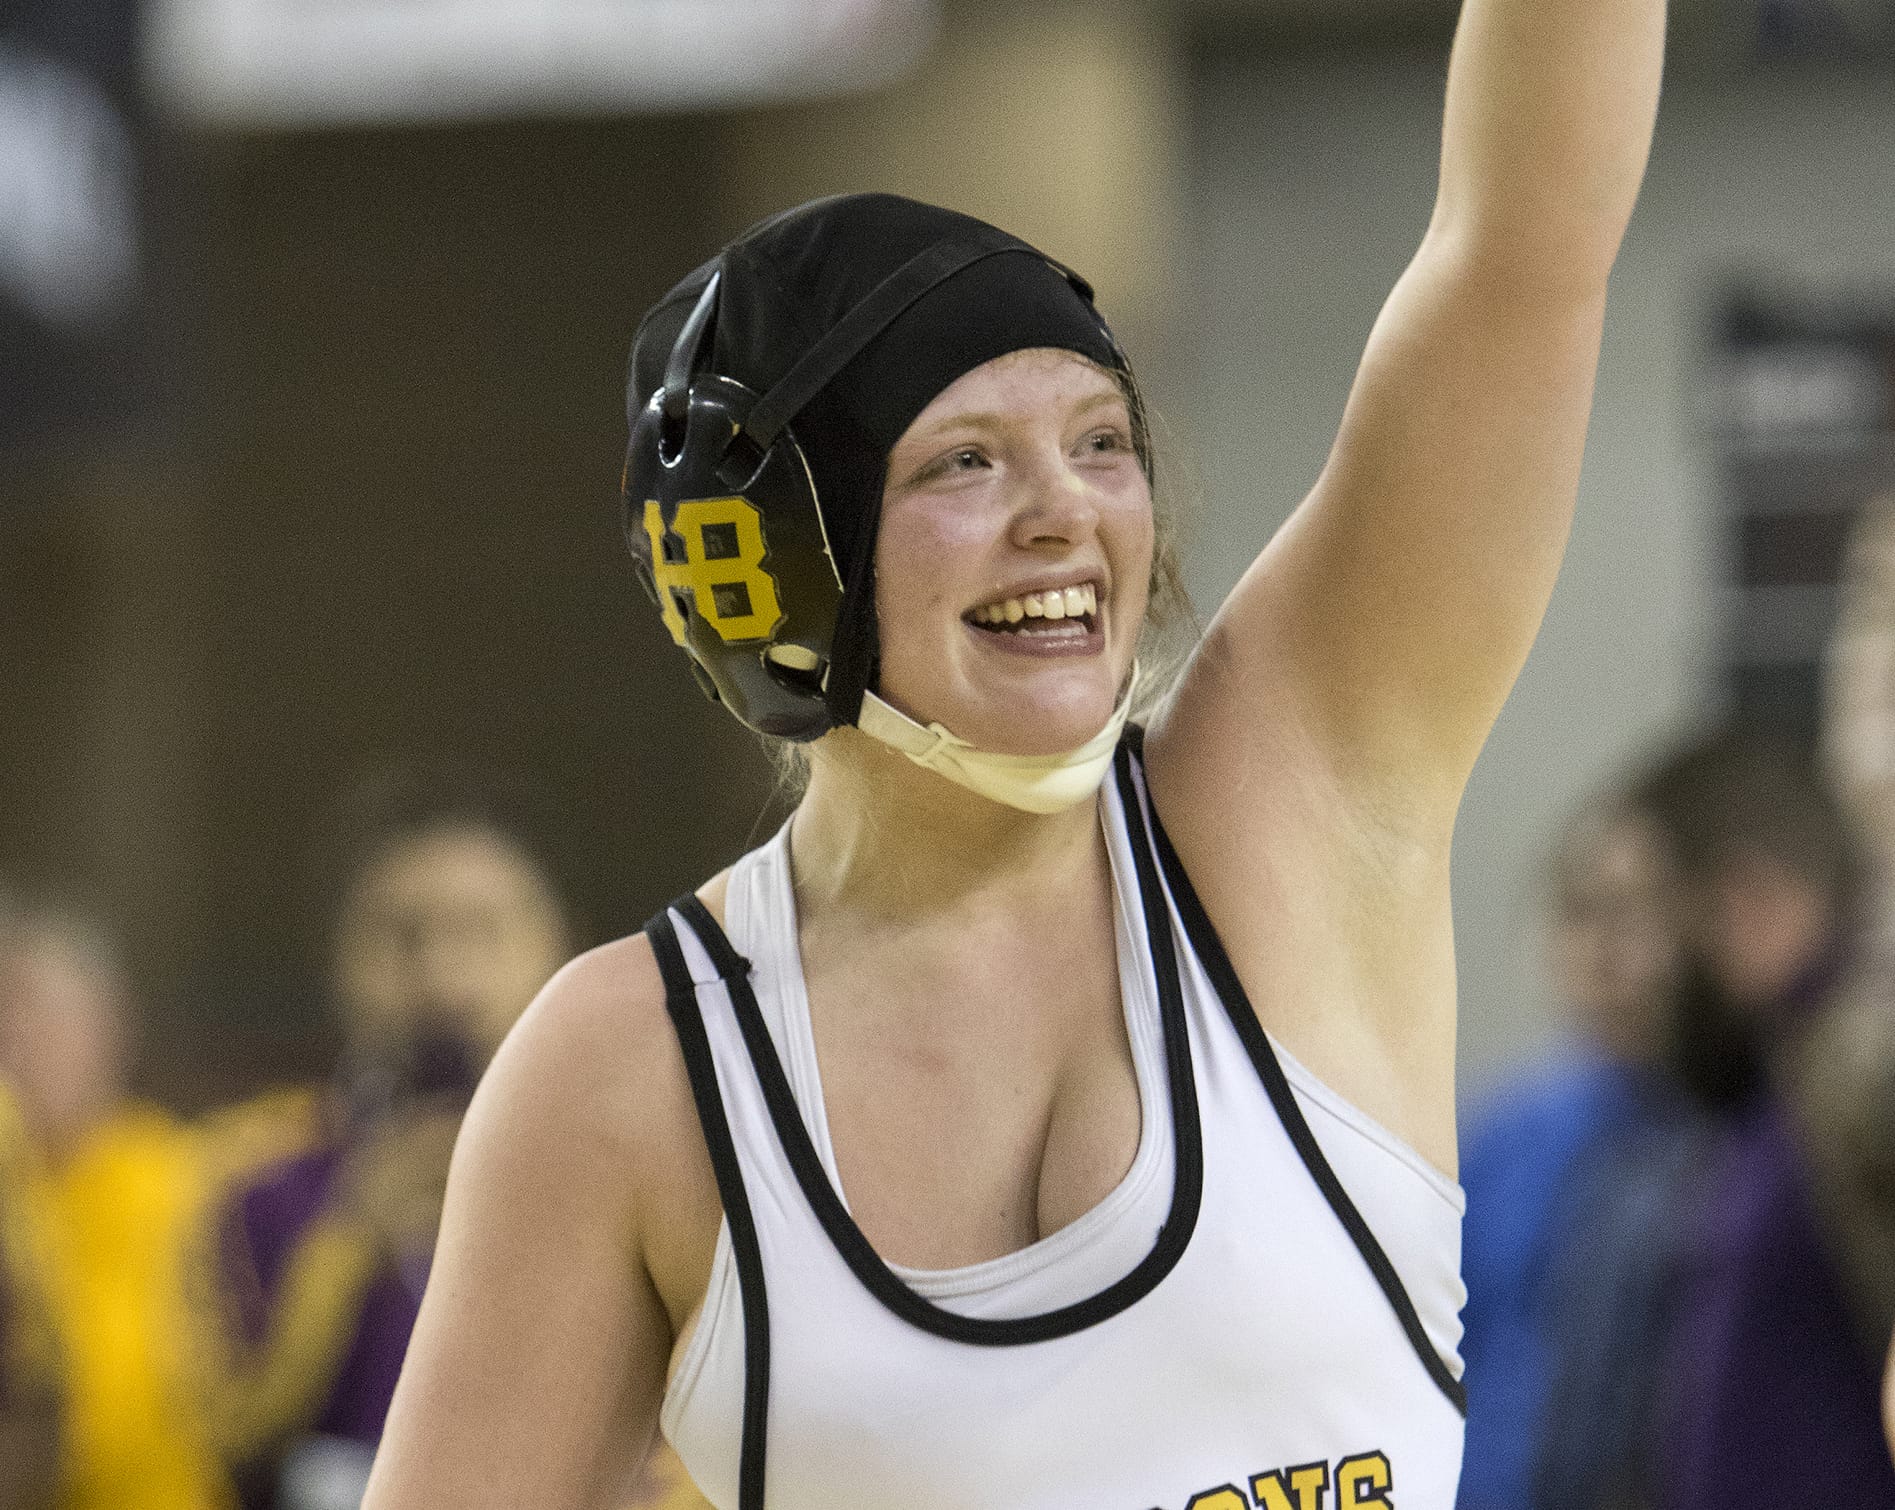 Hudson's Bay's Allison Blaine celebrates after defeating Sequim's Kiara Pierson in their 135-pound championship match at the Girls State Wrestling Tournament Saturday, Feb. 17, 2018, at the Tacoma Dome in Tacoma, Wash. Blaine won the match 4-2.